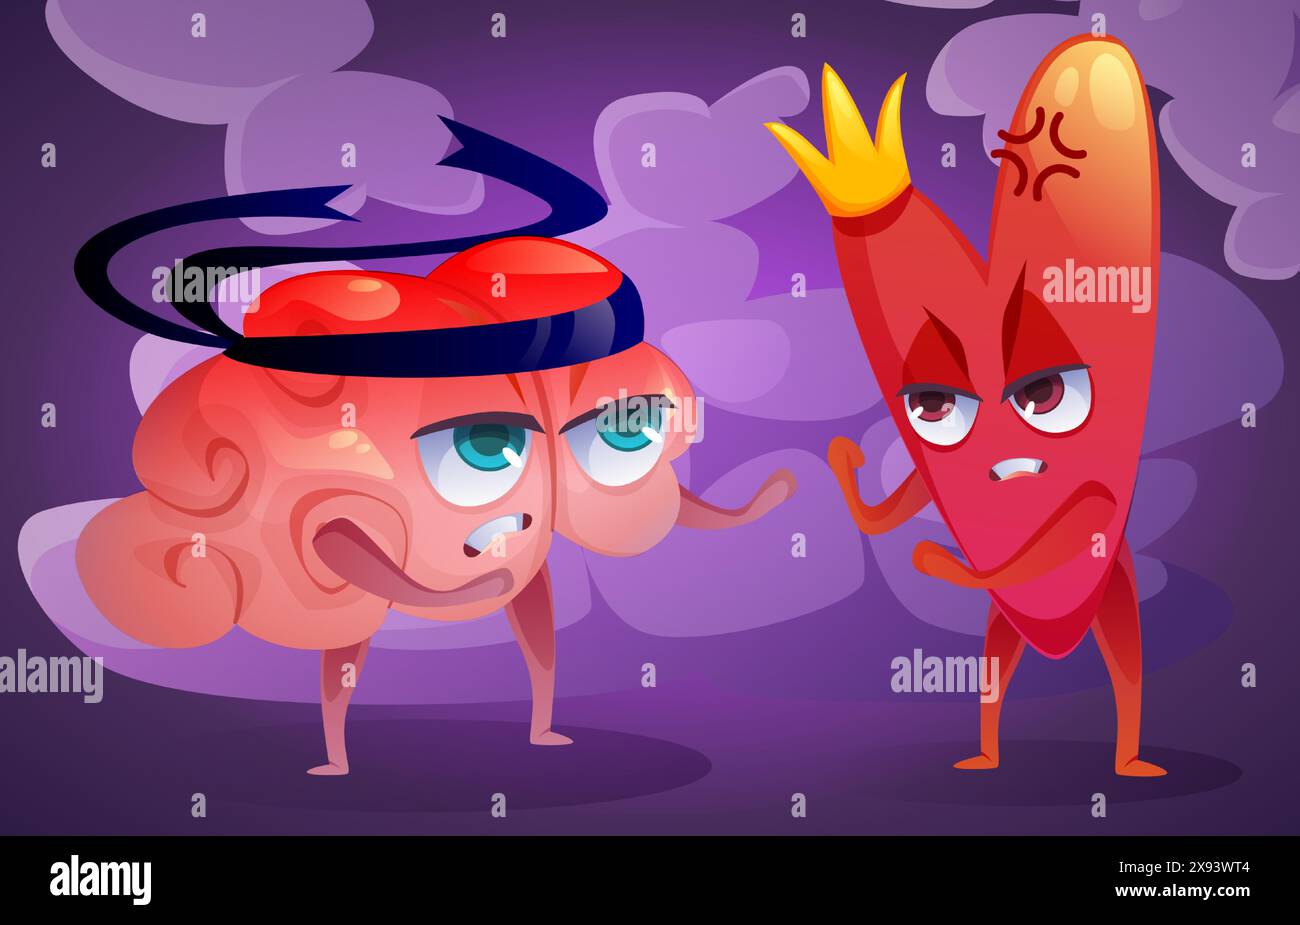 Heart and mind relations and connect concept. Human organs cartoon characters fighting. Brain and heart struggle for intelligence and emotion balance. Vector illustration of feeling and rationality. Stock Vector